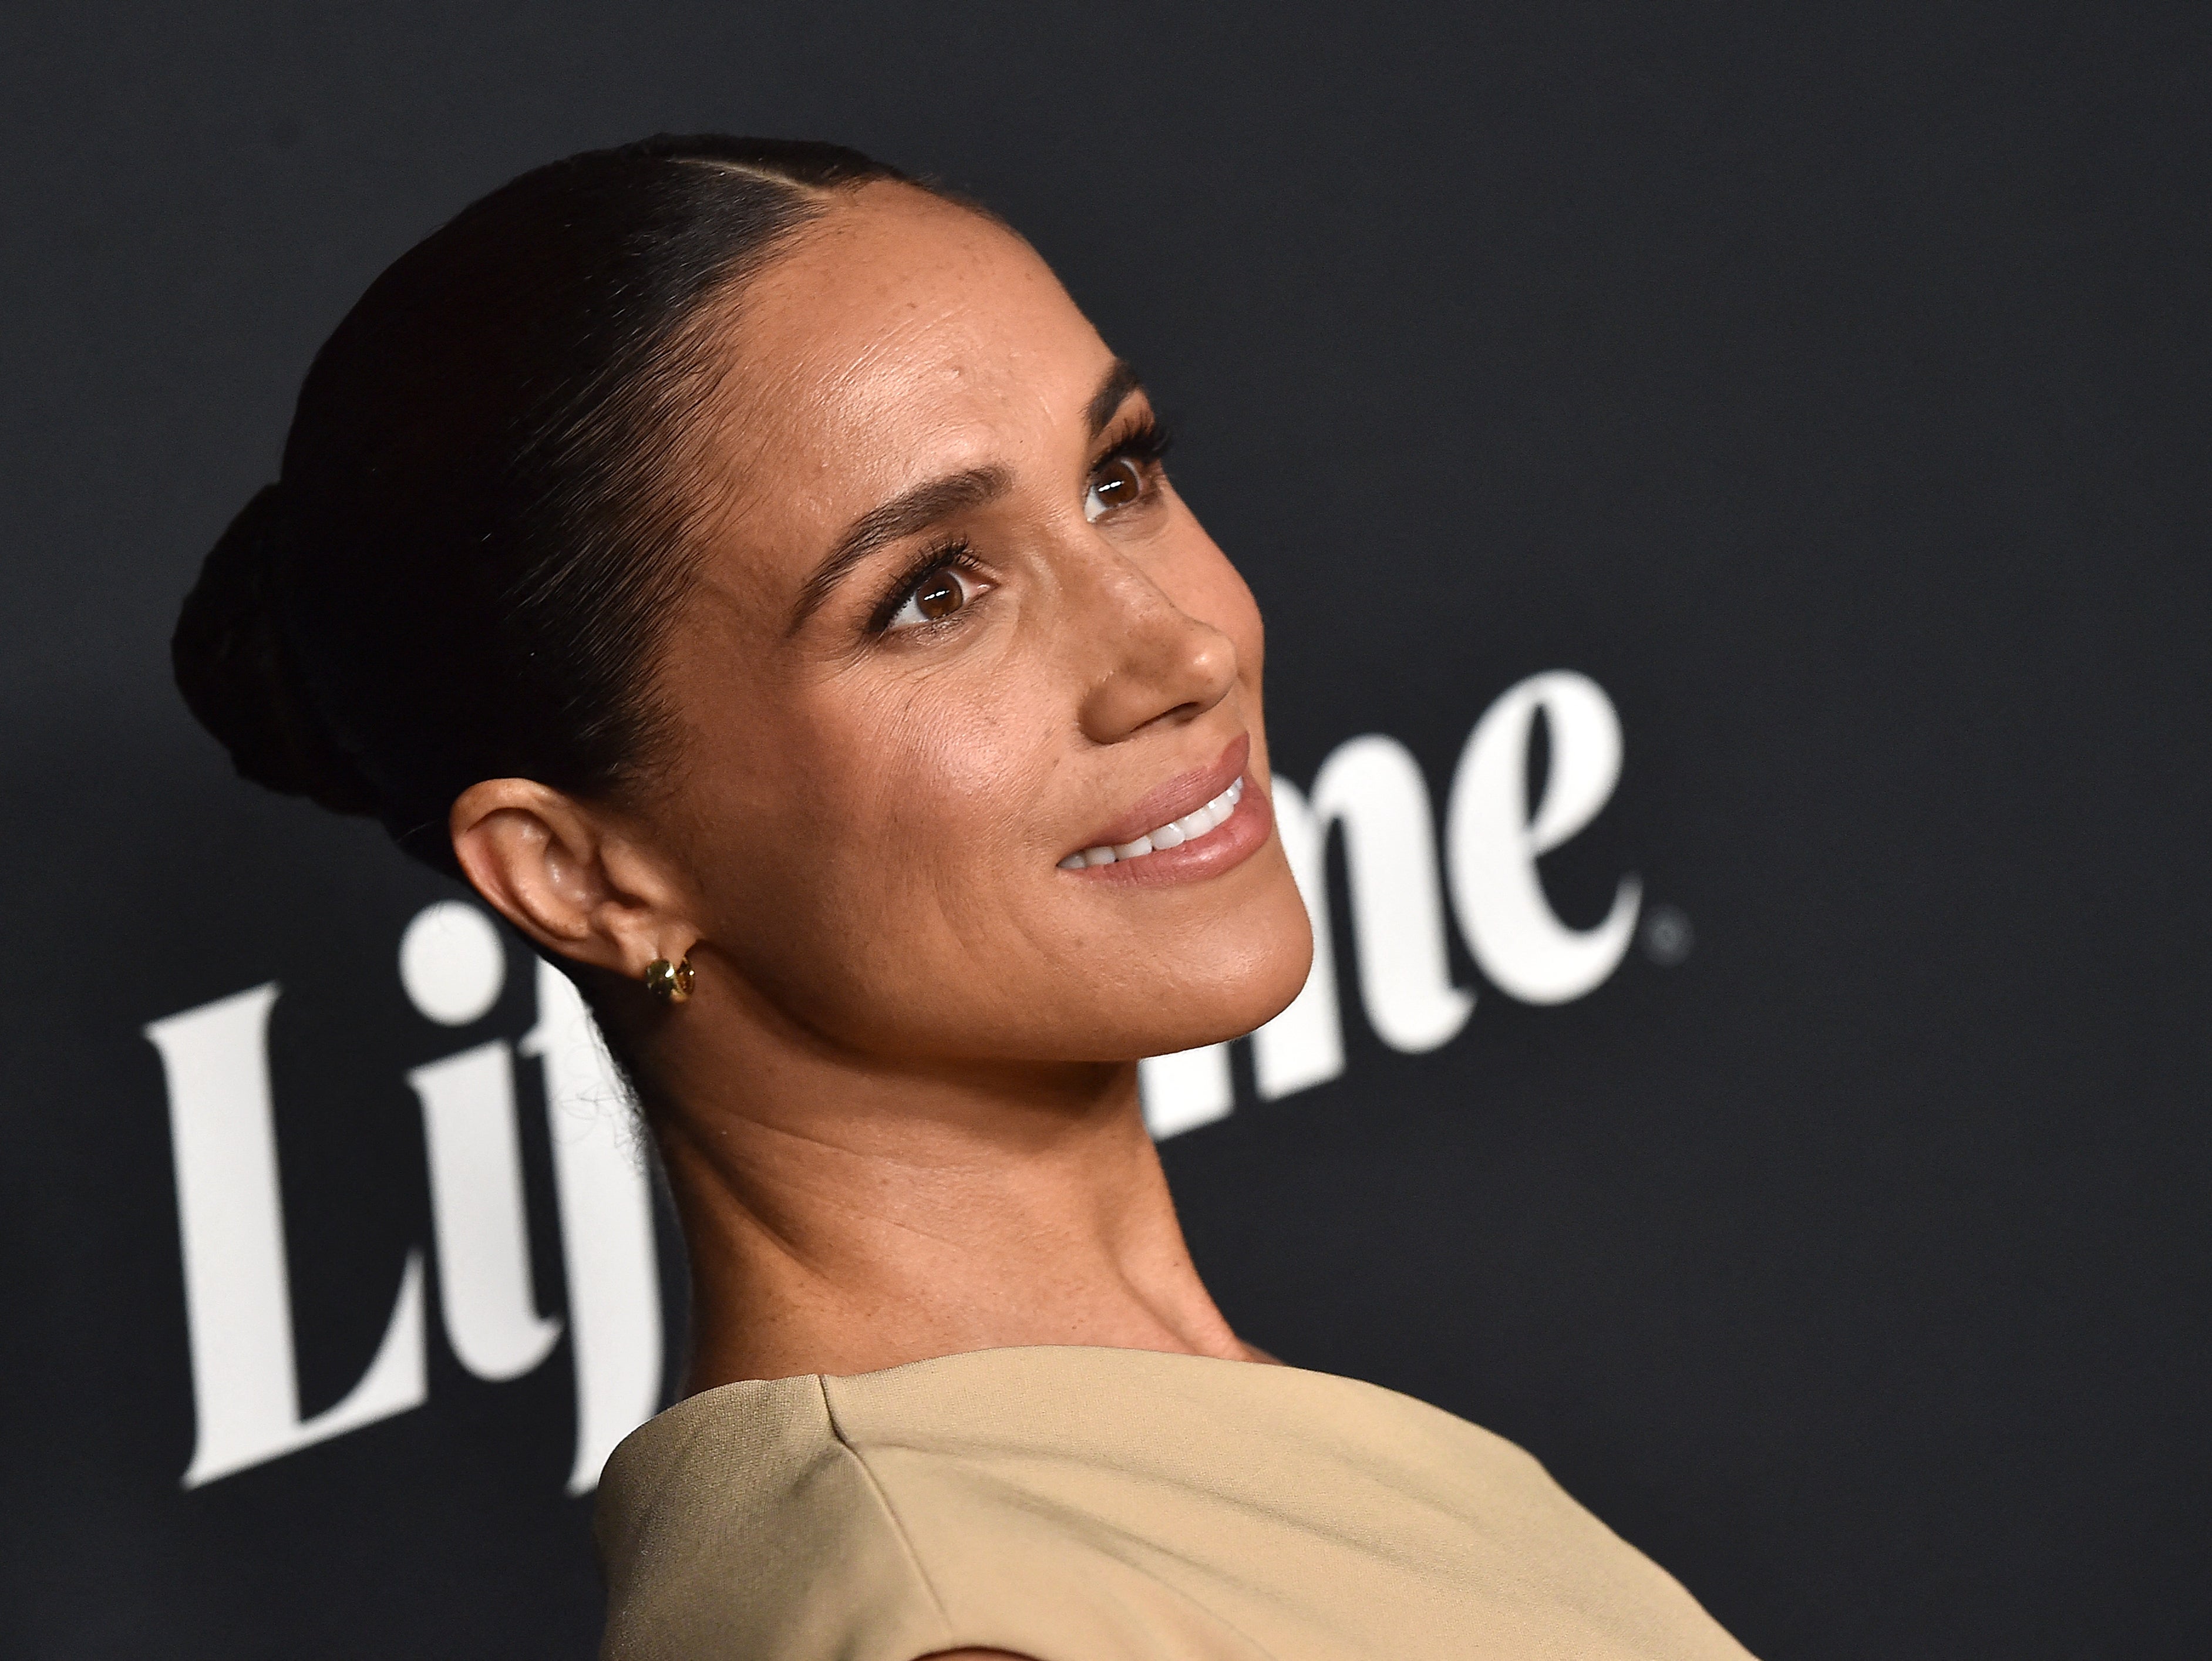 Meghan Markle has been listed as a ‘visionary female leader’